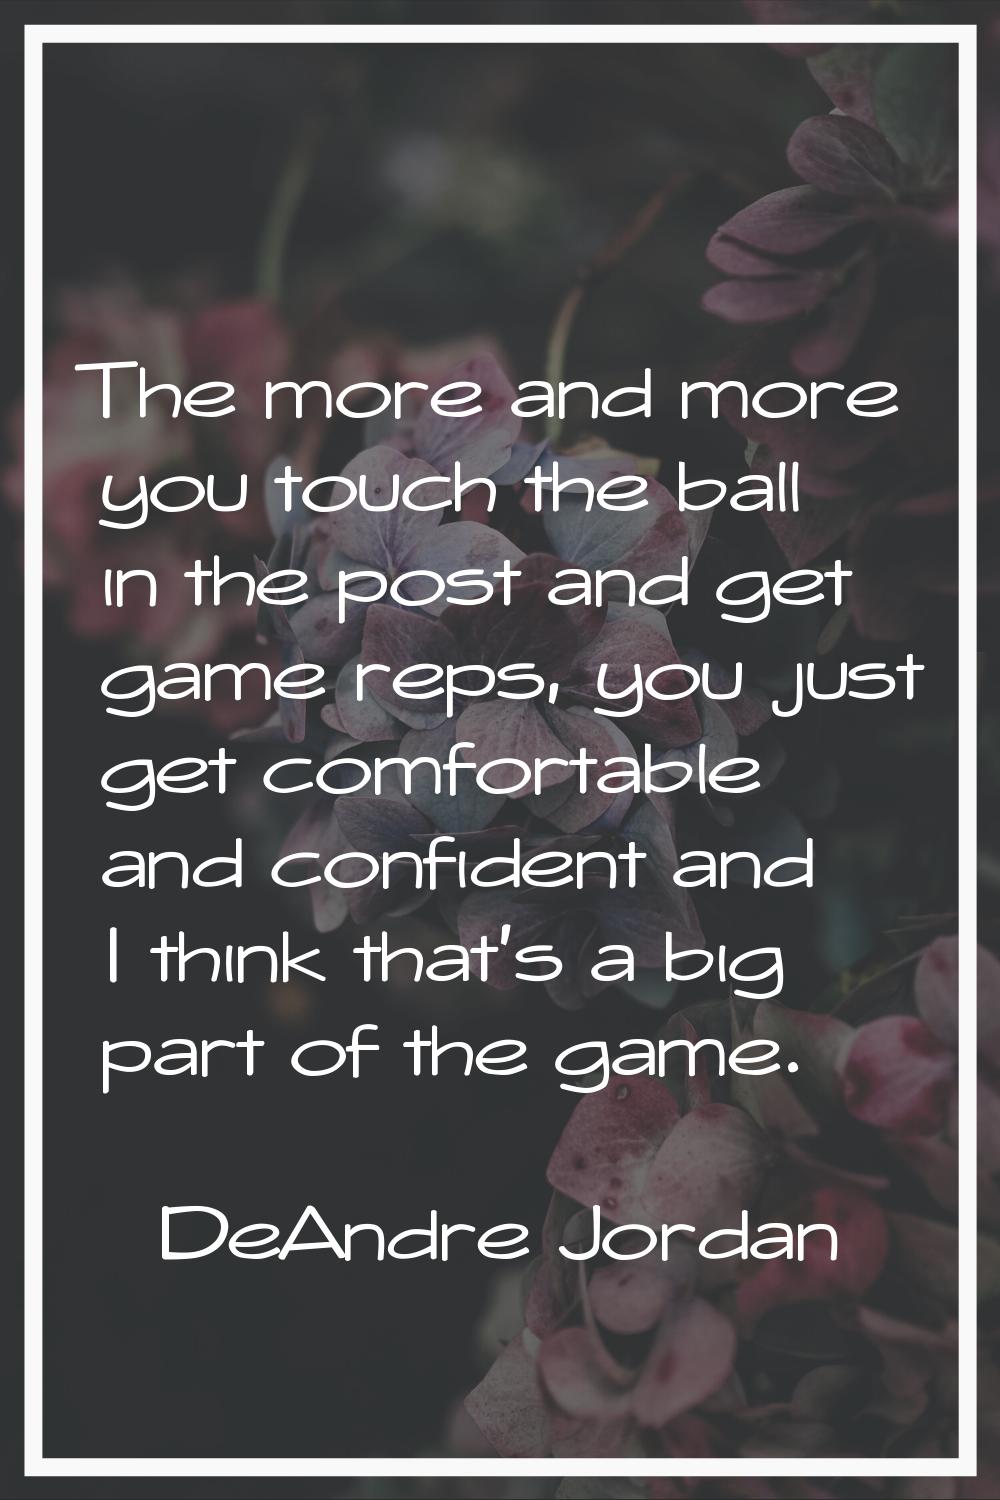 The more and more you touch the ball in the post and get game reps, you just get comfortable and co